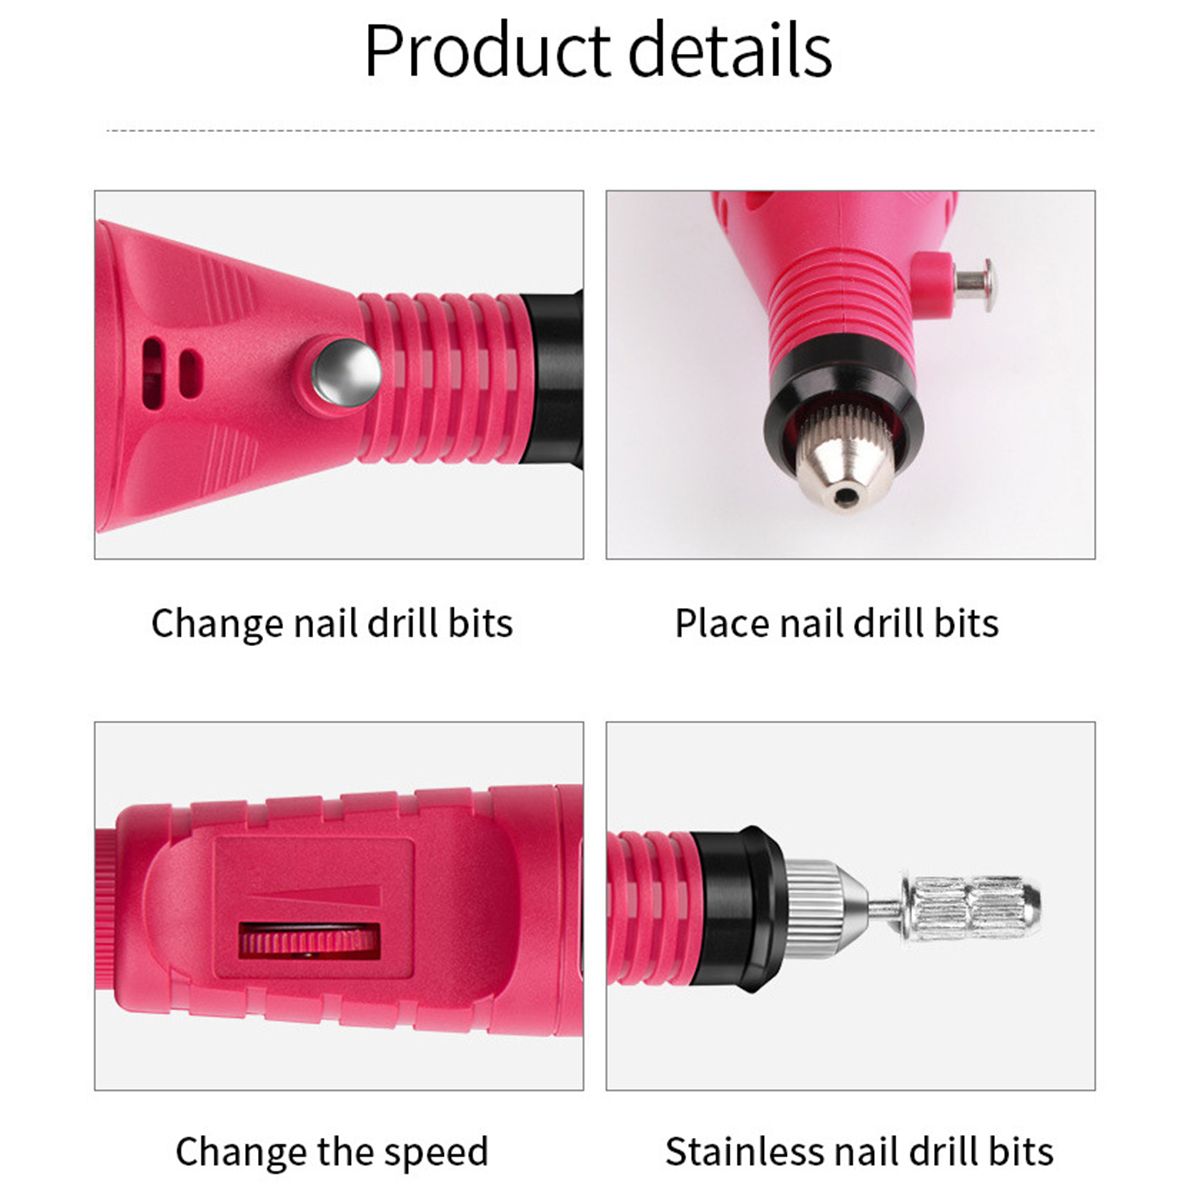 0-20000RPM-6-Color-USB-Charging-Electric-Nail-Grinder-Drill-Portable-Manicure-Pedicure-Nail-Machine--1764630-5